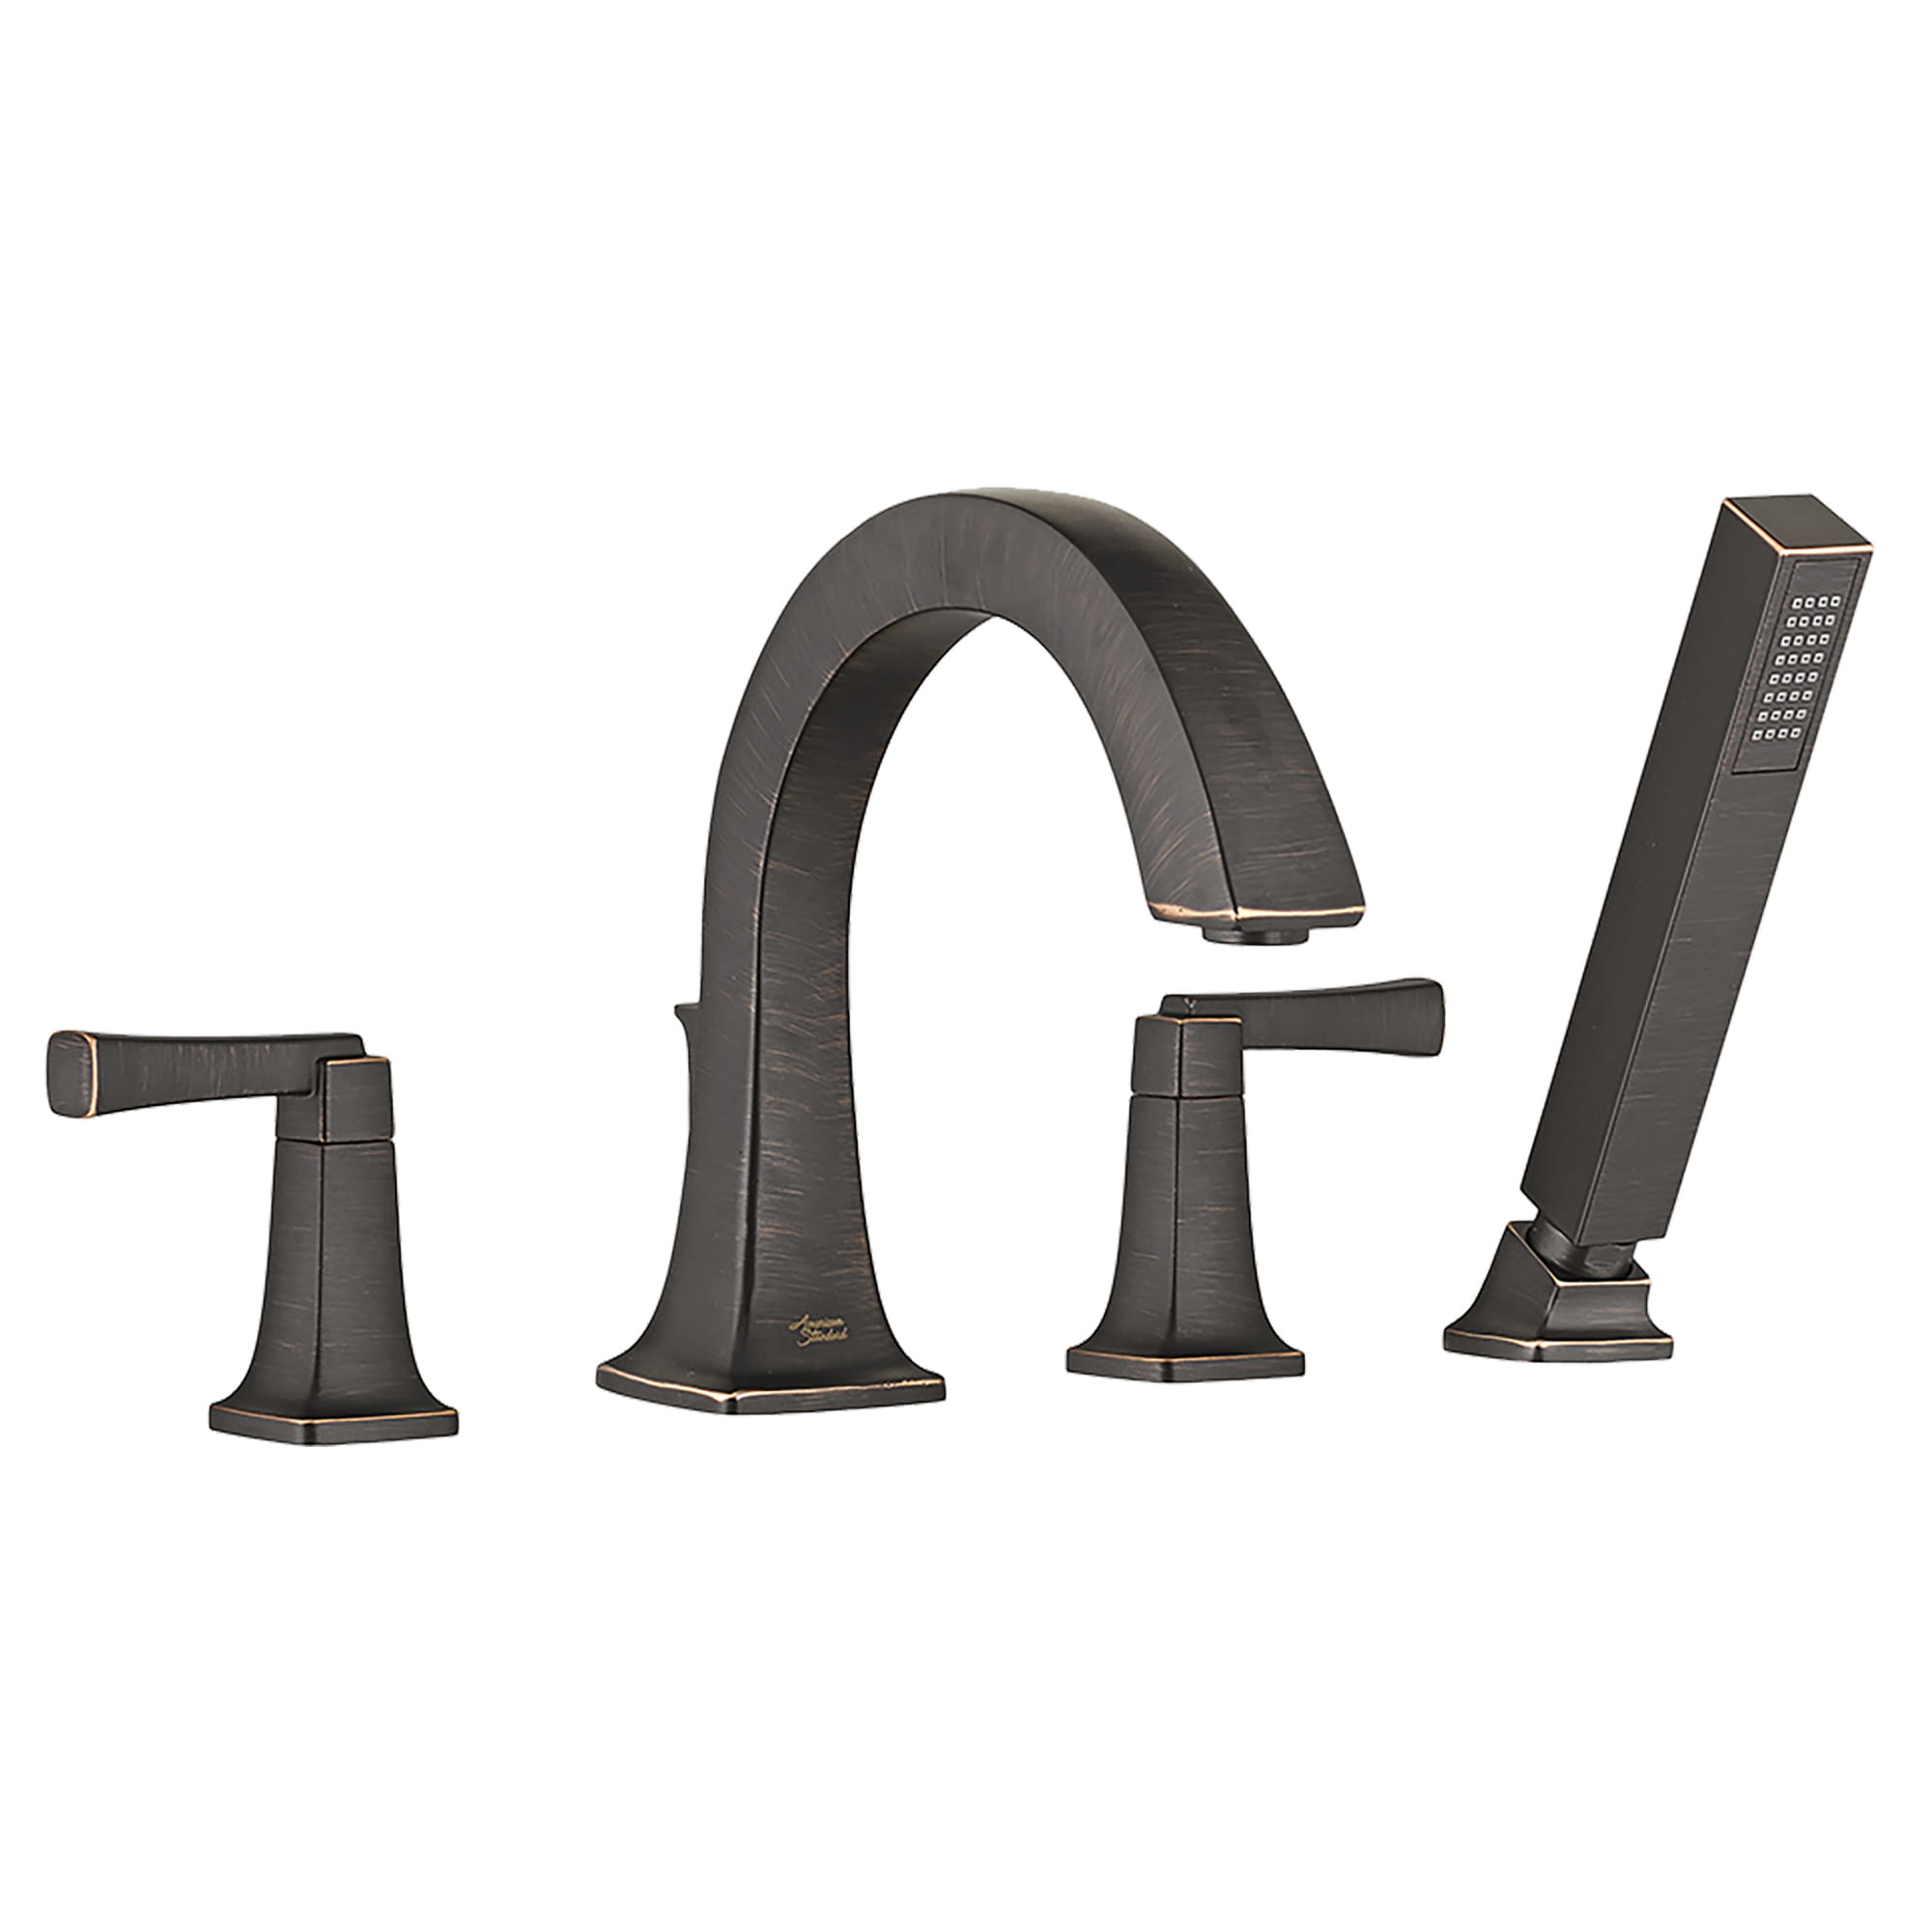 Townsend Bathtub Faucet with Personal Shower for Flash Rough in Valve with Lever Handles LEGACY BRONZE